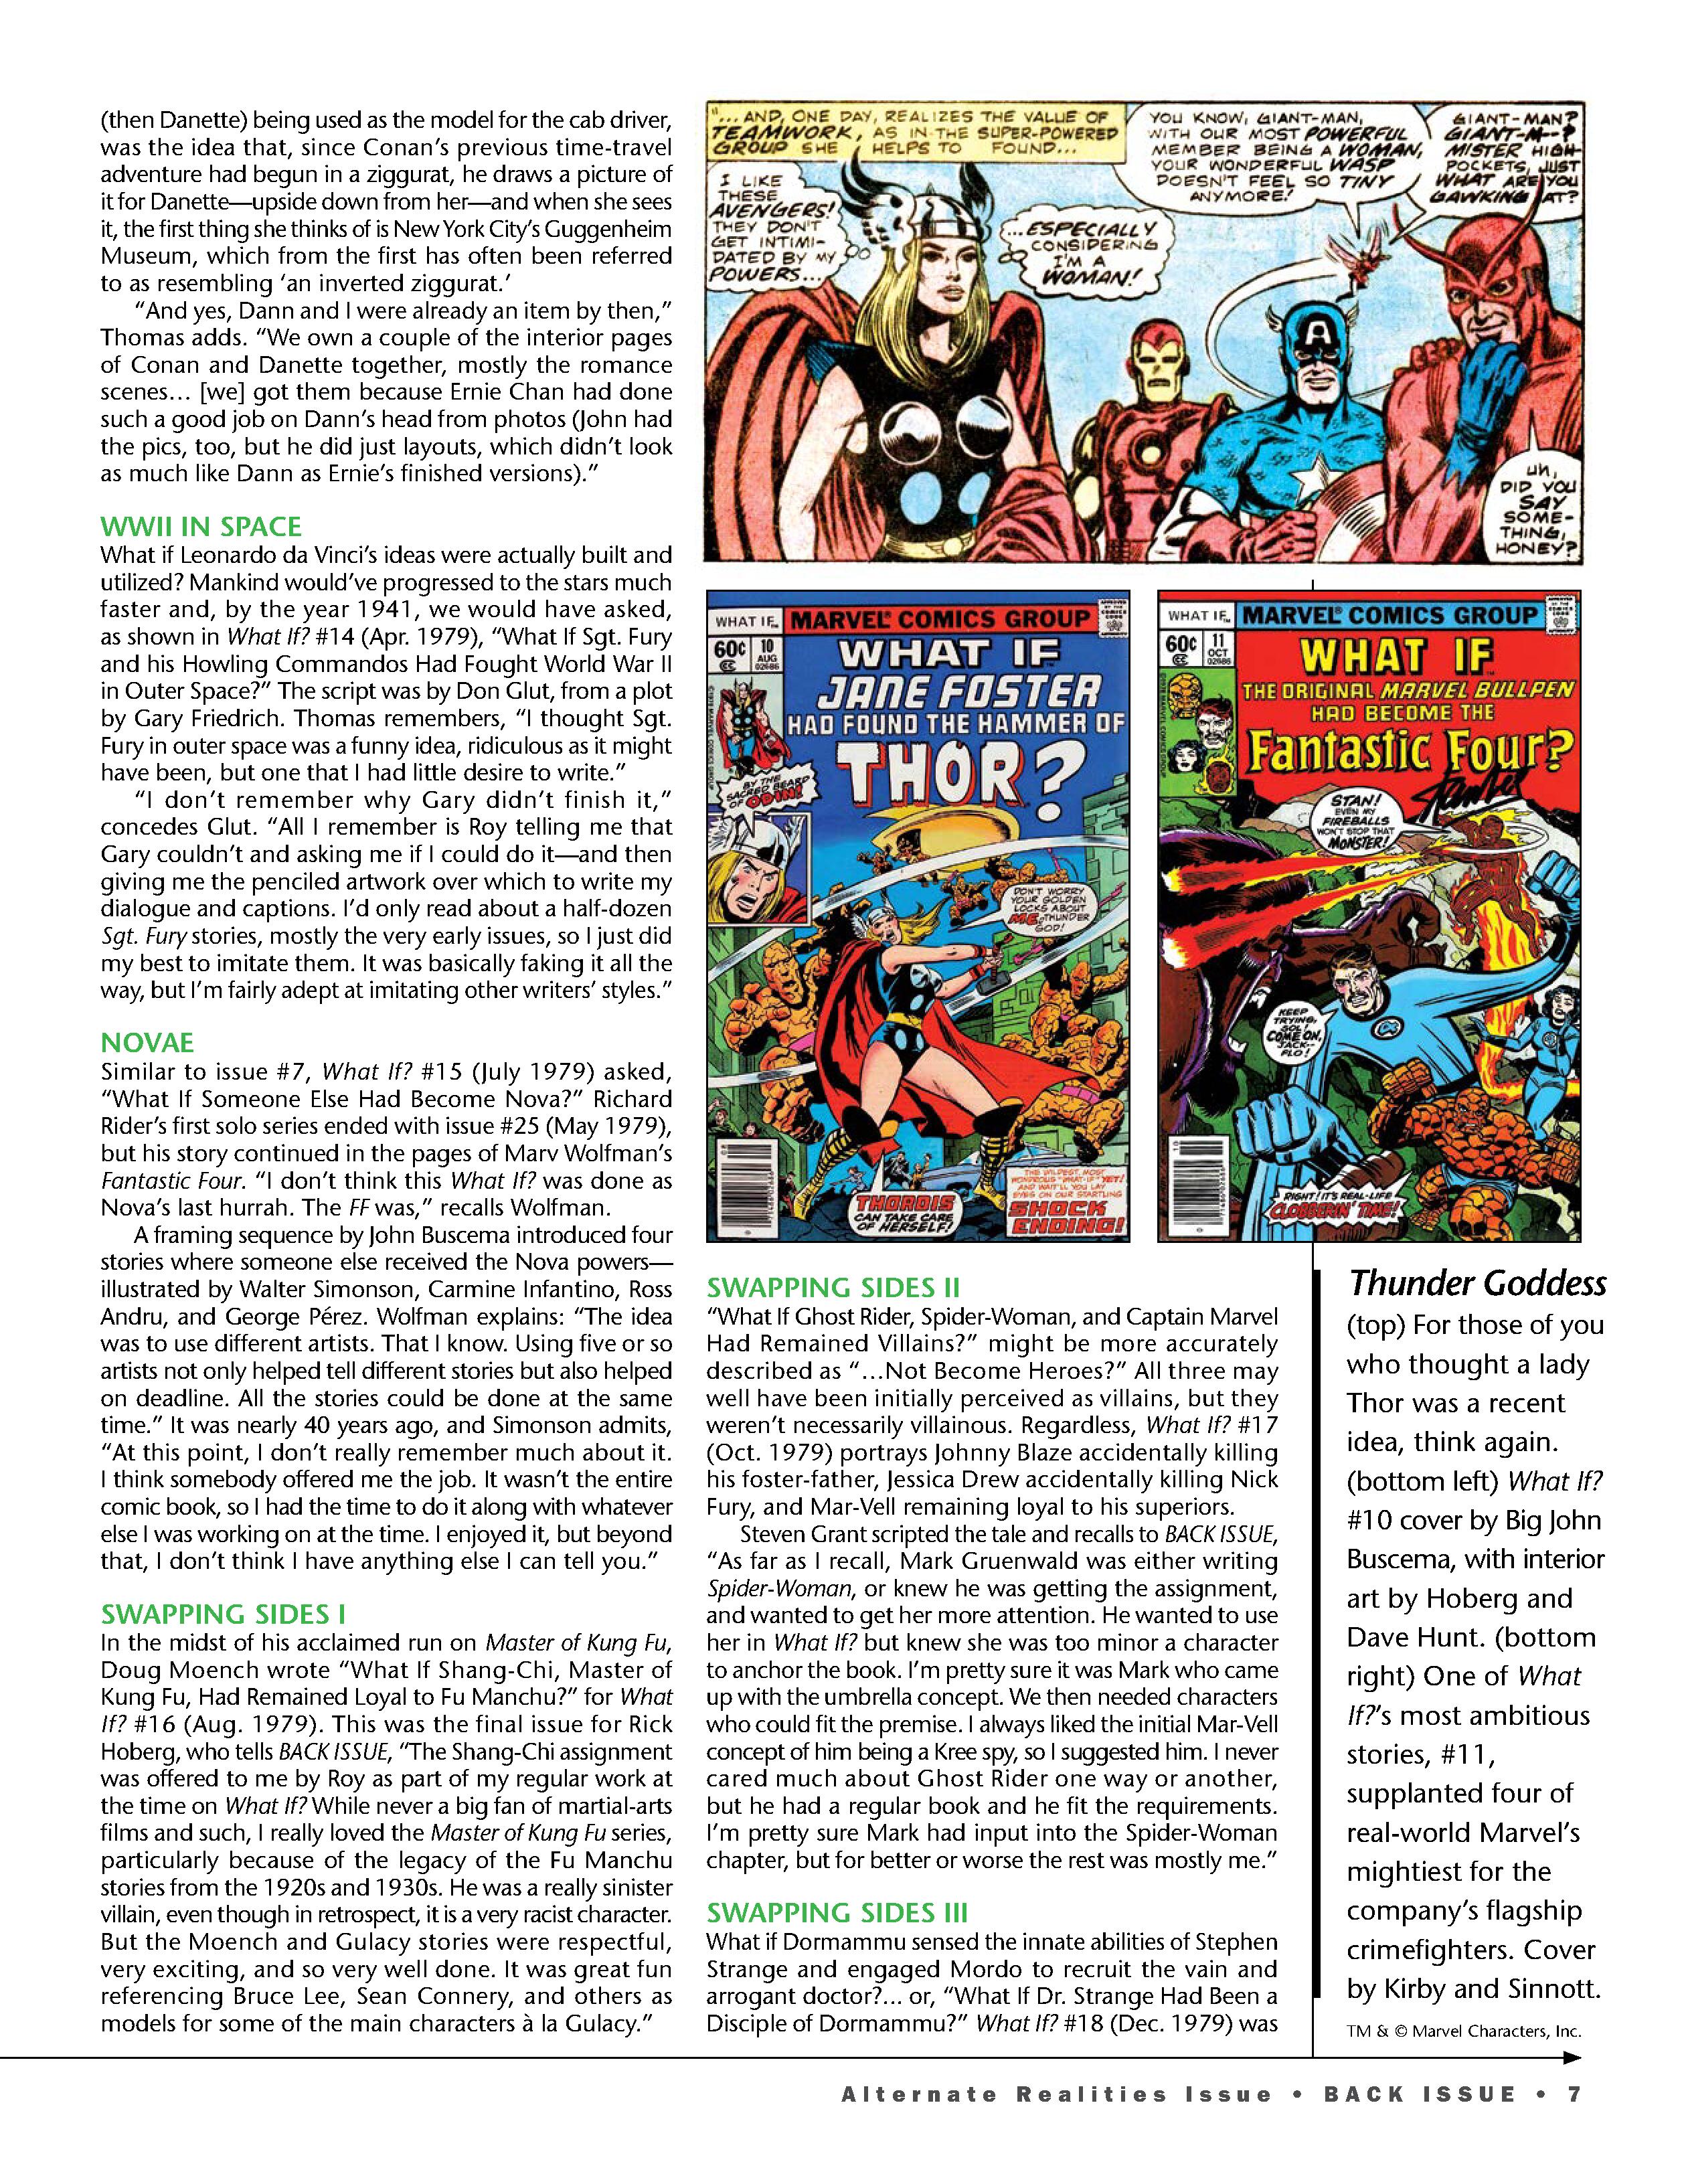 Read online Back Issue comic -  Issue #111 - 9